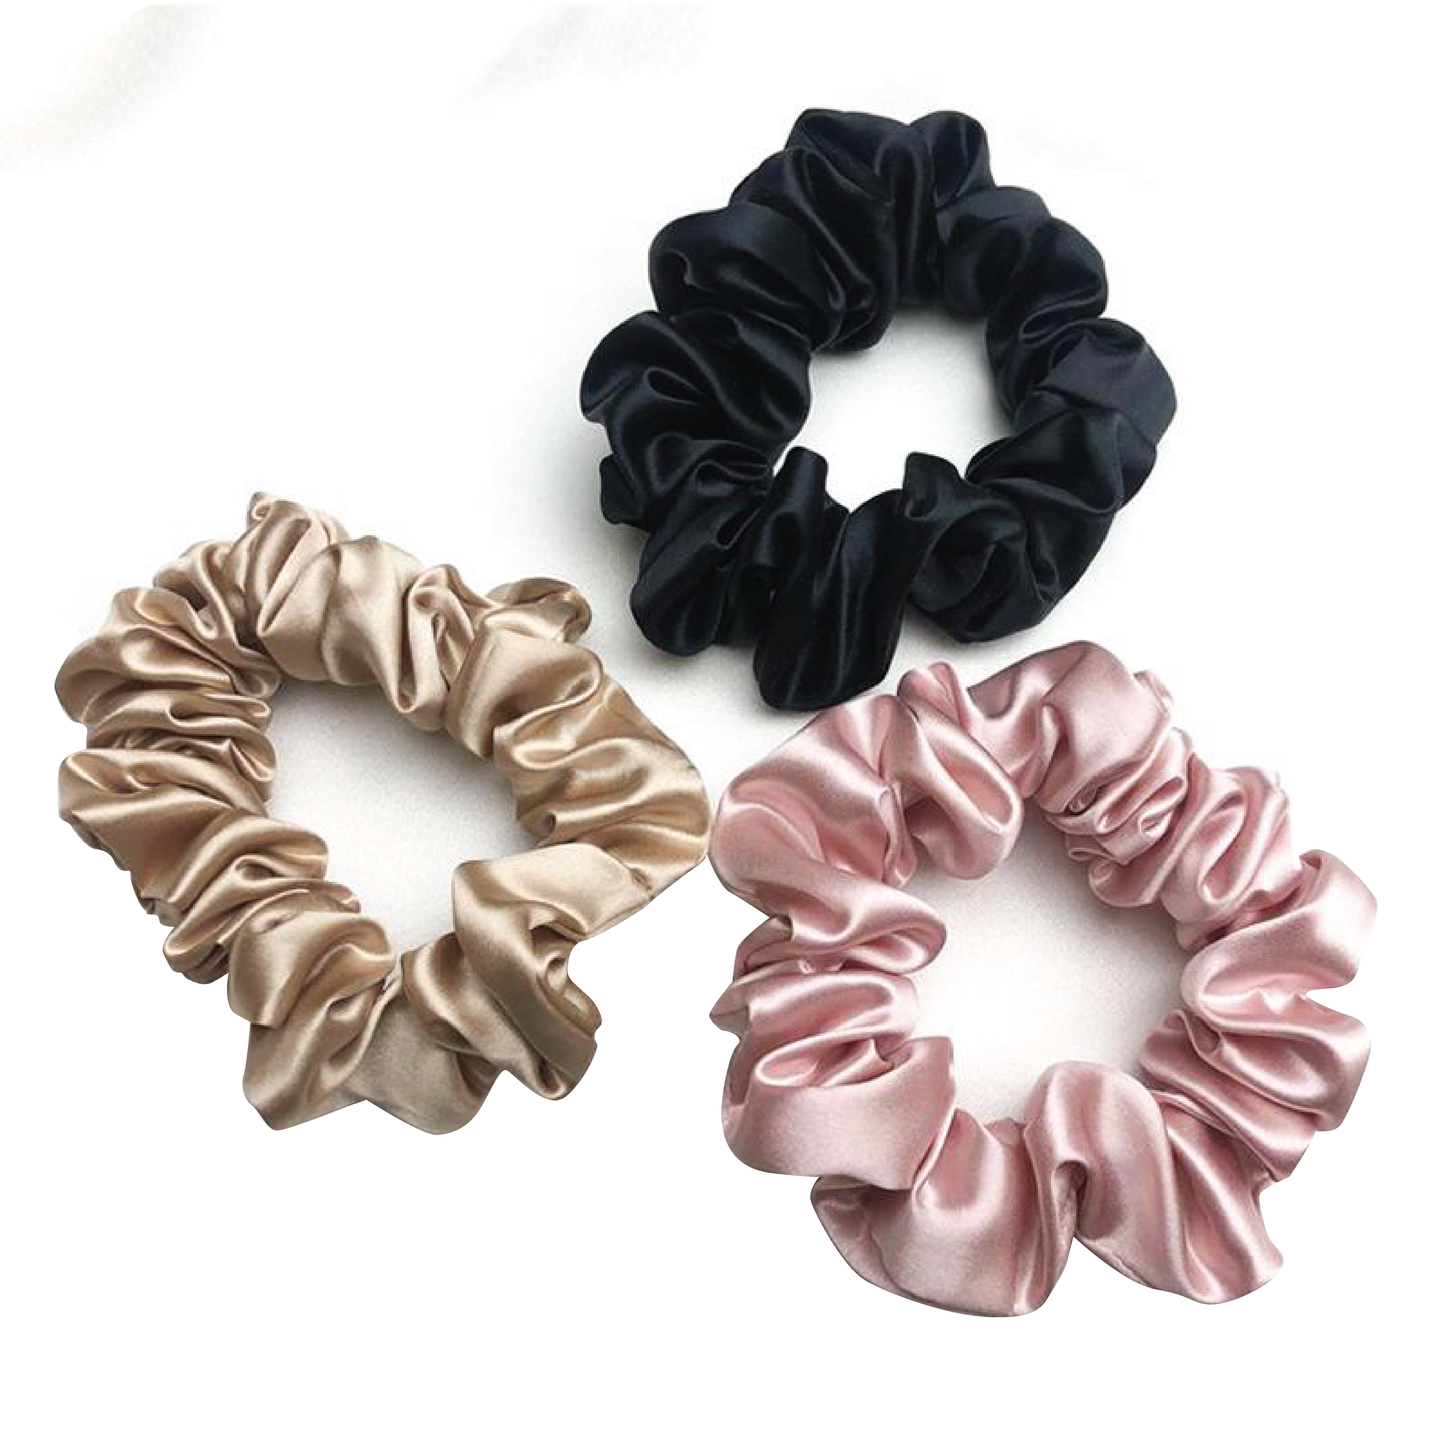 Available in 3 essential colours, this set of mulberry silk scrunchies will protect your hair and provide an affordable solution to your hair troubles. Or gift it to a dear friend, whom you know is suffering from dry and damaged hair.